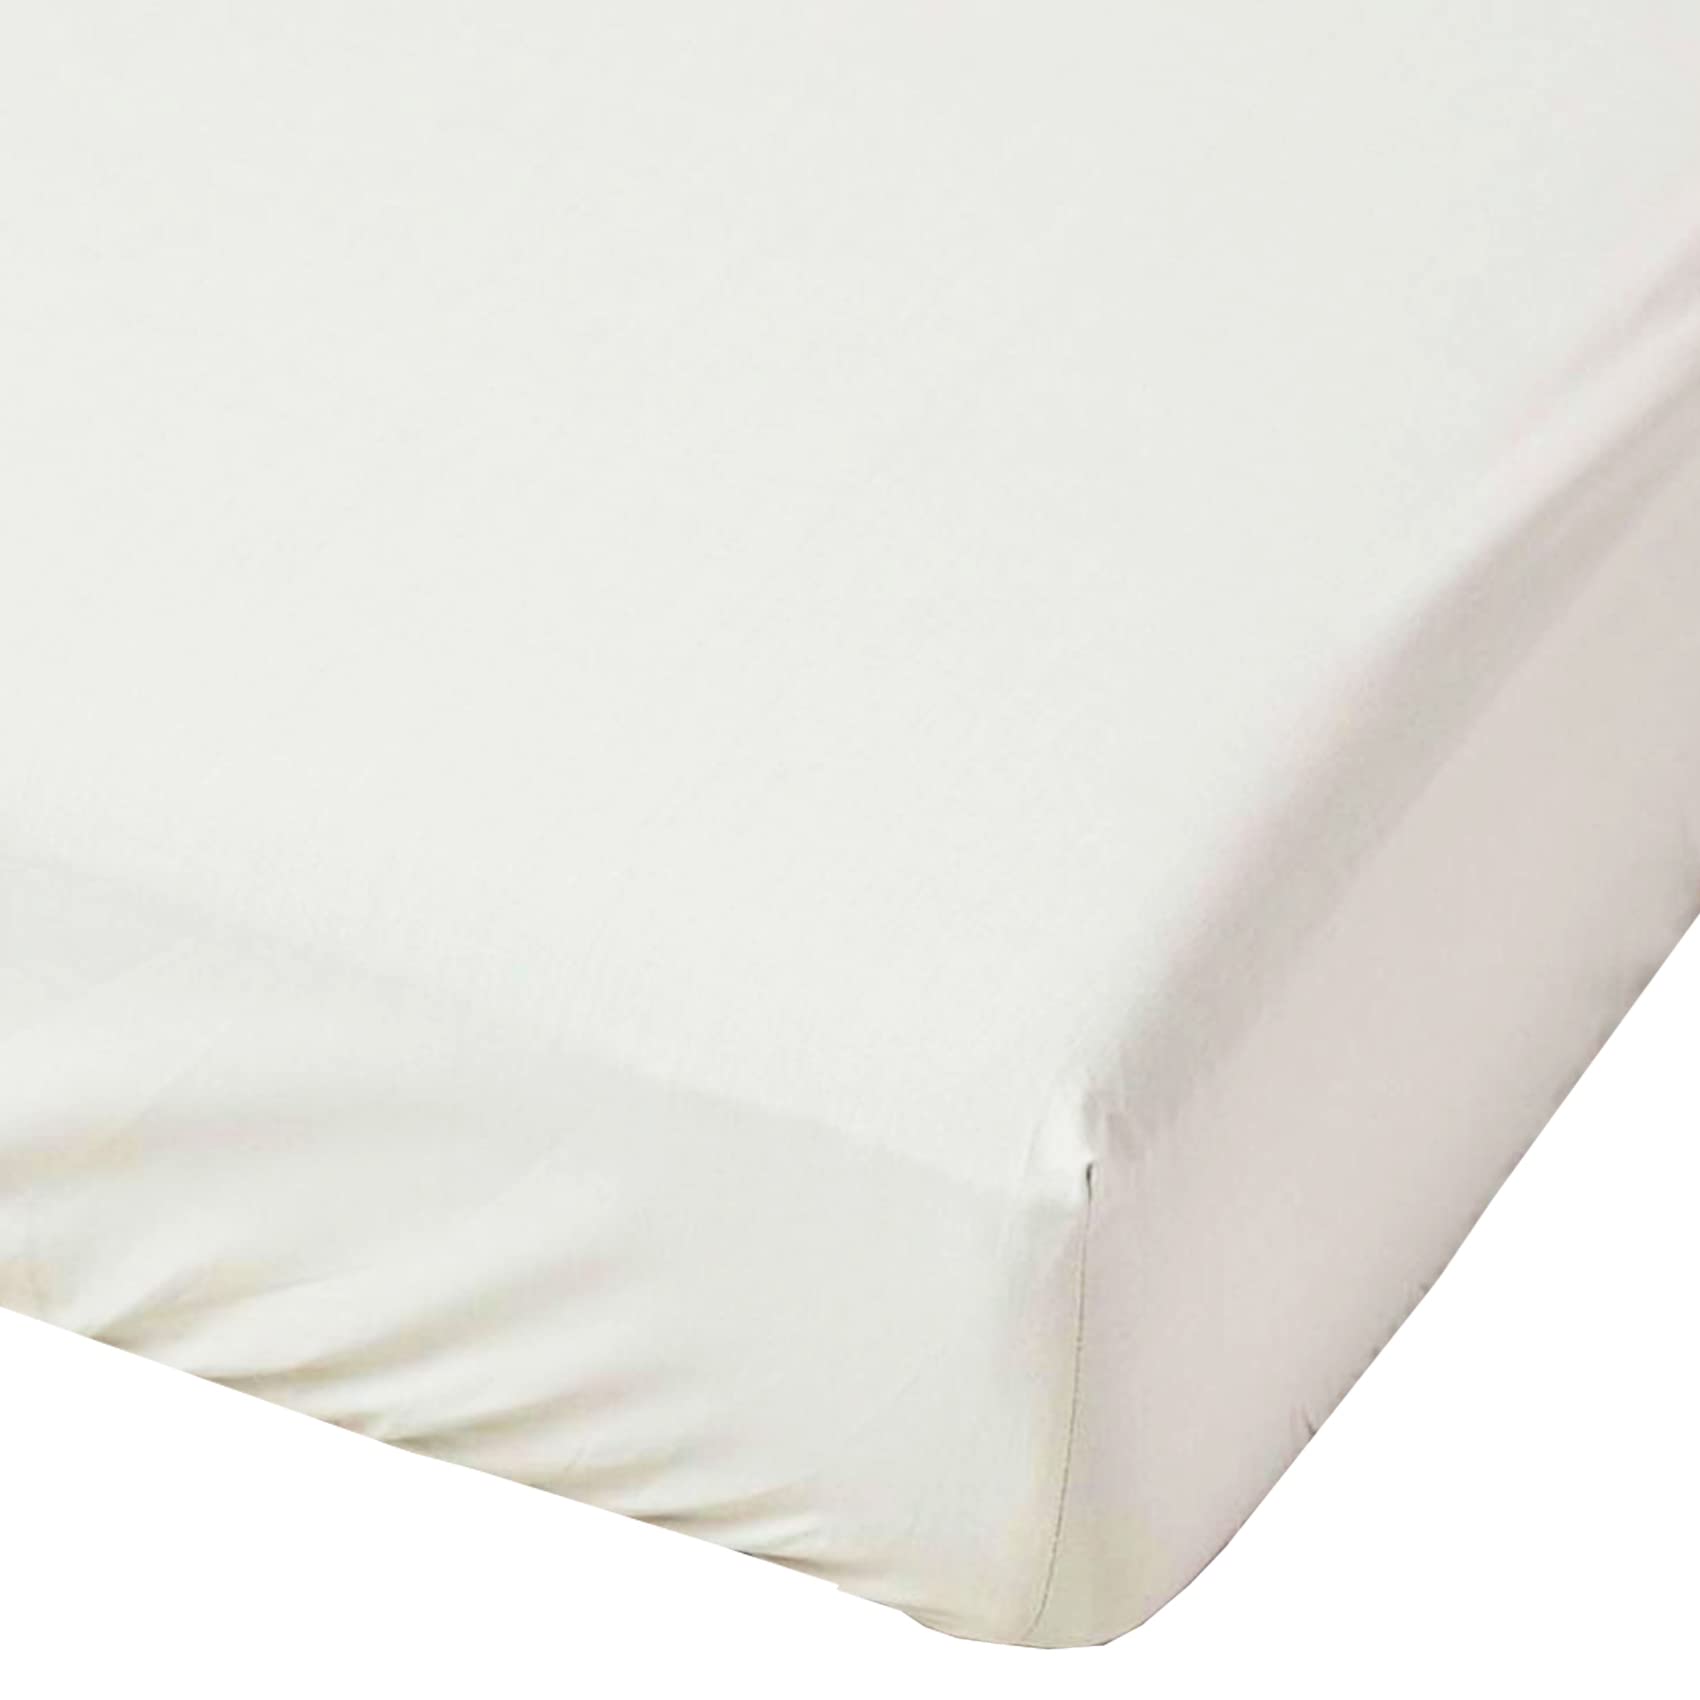 Brit Cotton Easycare Fitted Sheet 25cm/10" Deep with Elasticated Corners, Breathable & Soft Polycotton Bed Sheets (Cream, 4FT SMALL DOUBLE)